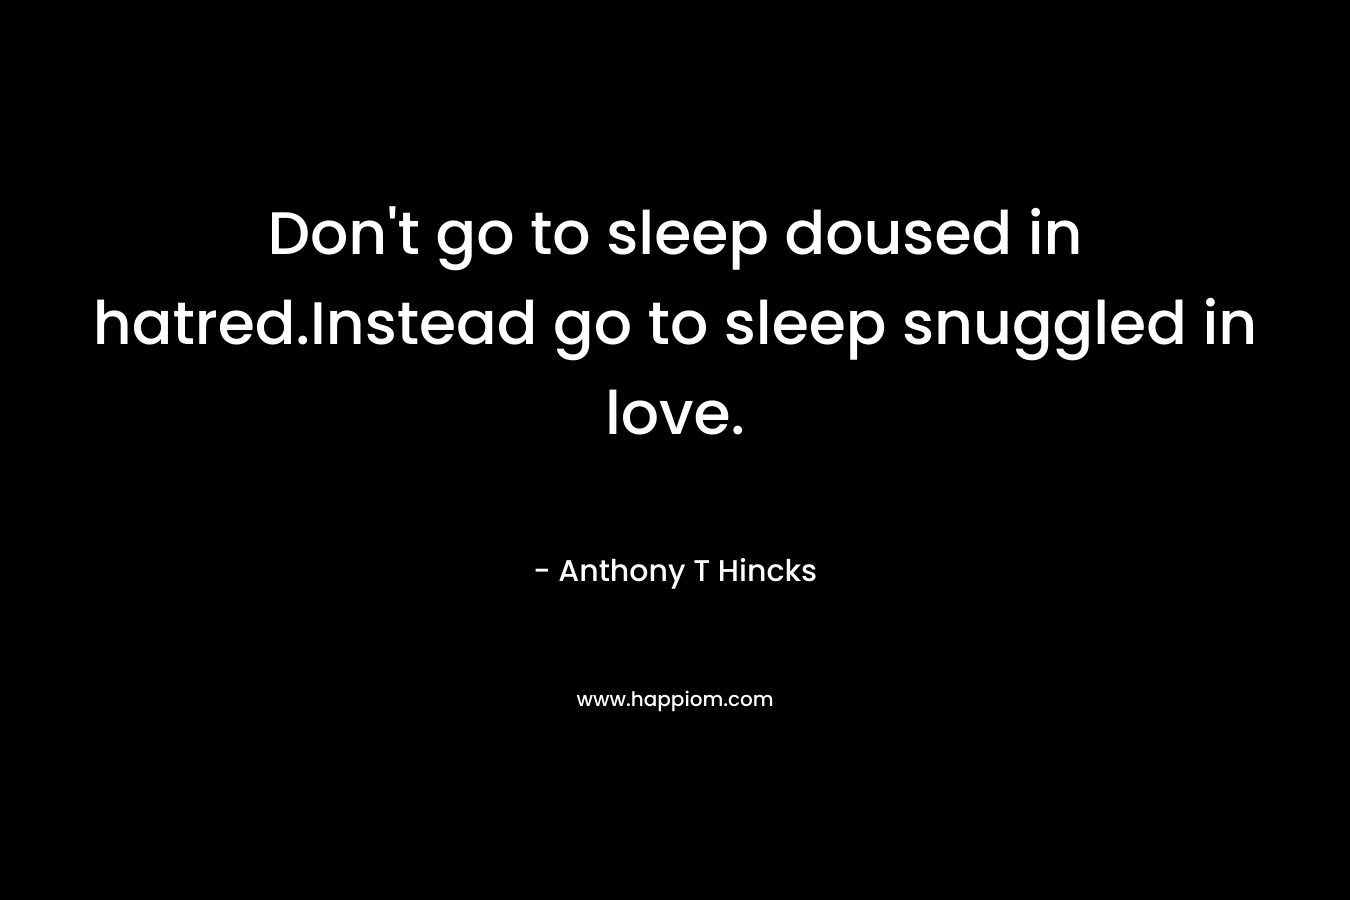 Don’t go to sleep doused in hatred.Instead go to sleep snuggled in love. – Anthony T Hincks